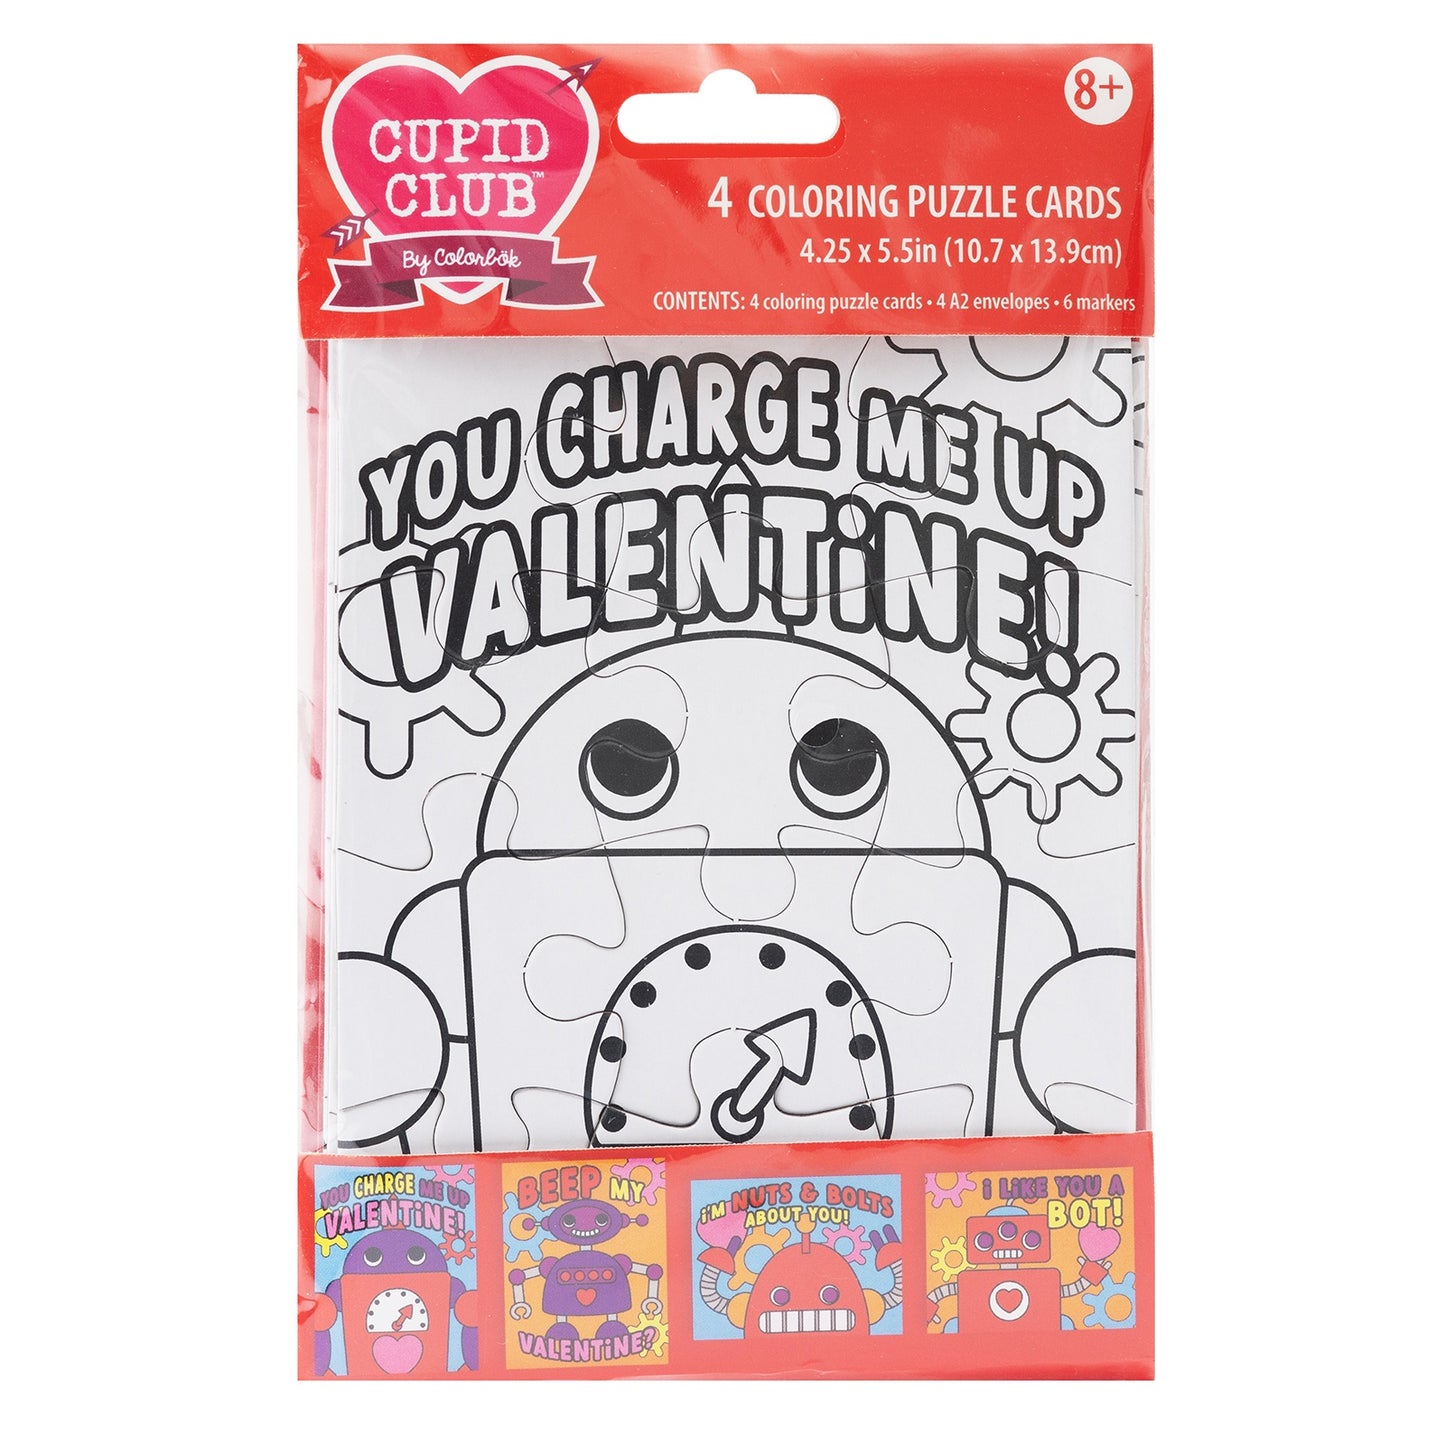 Colorbok Cupid Club Color Your Own Puzzle Card Kit-Robot, Makes 4